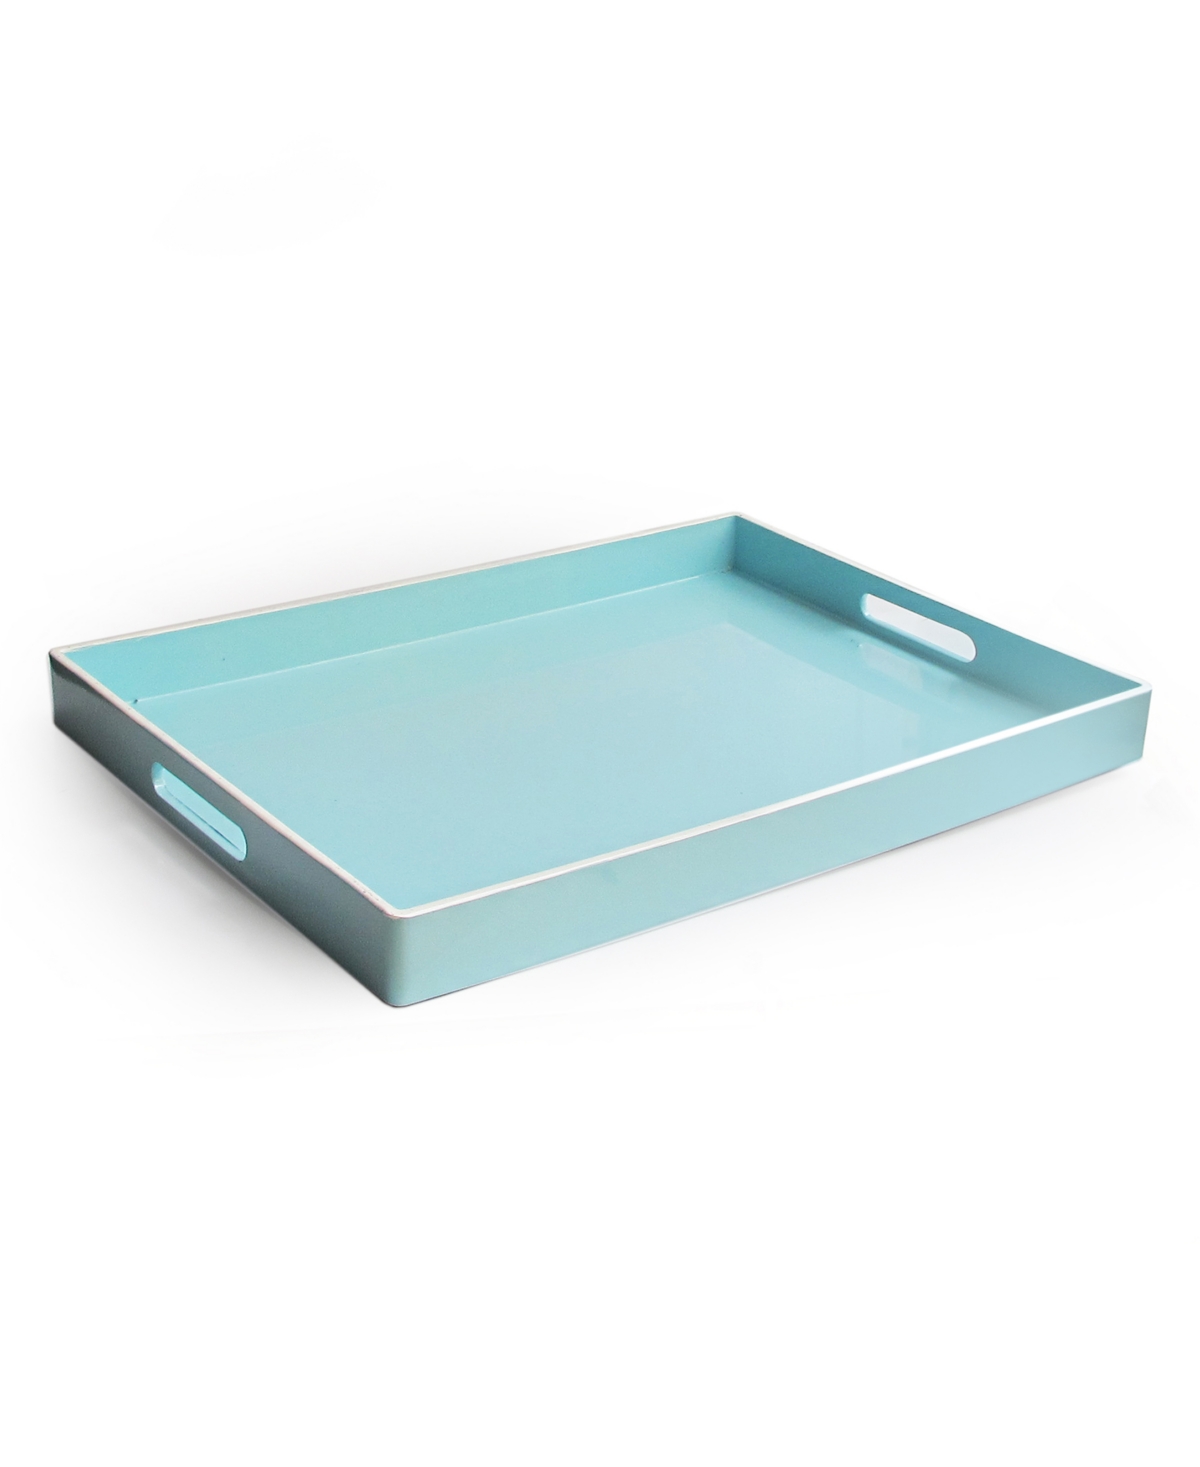 American Atelier Angular Tray With Handles, 14" X 19" In Teal